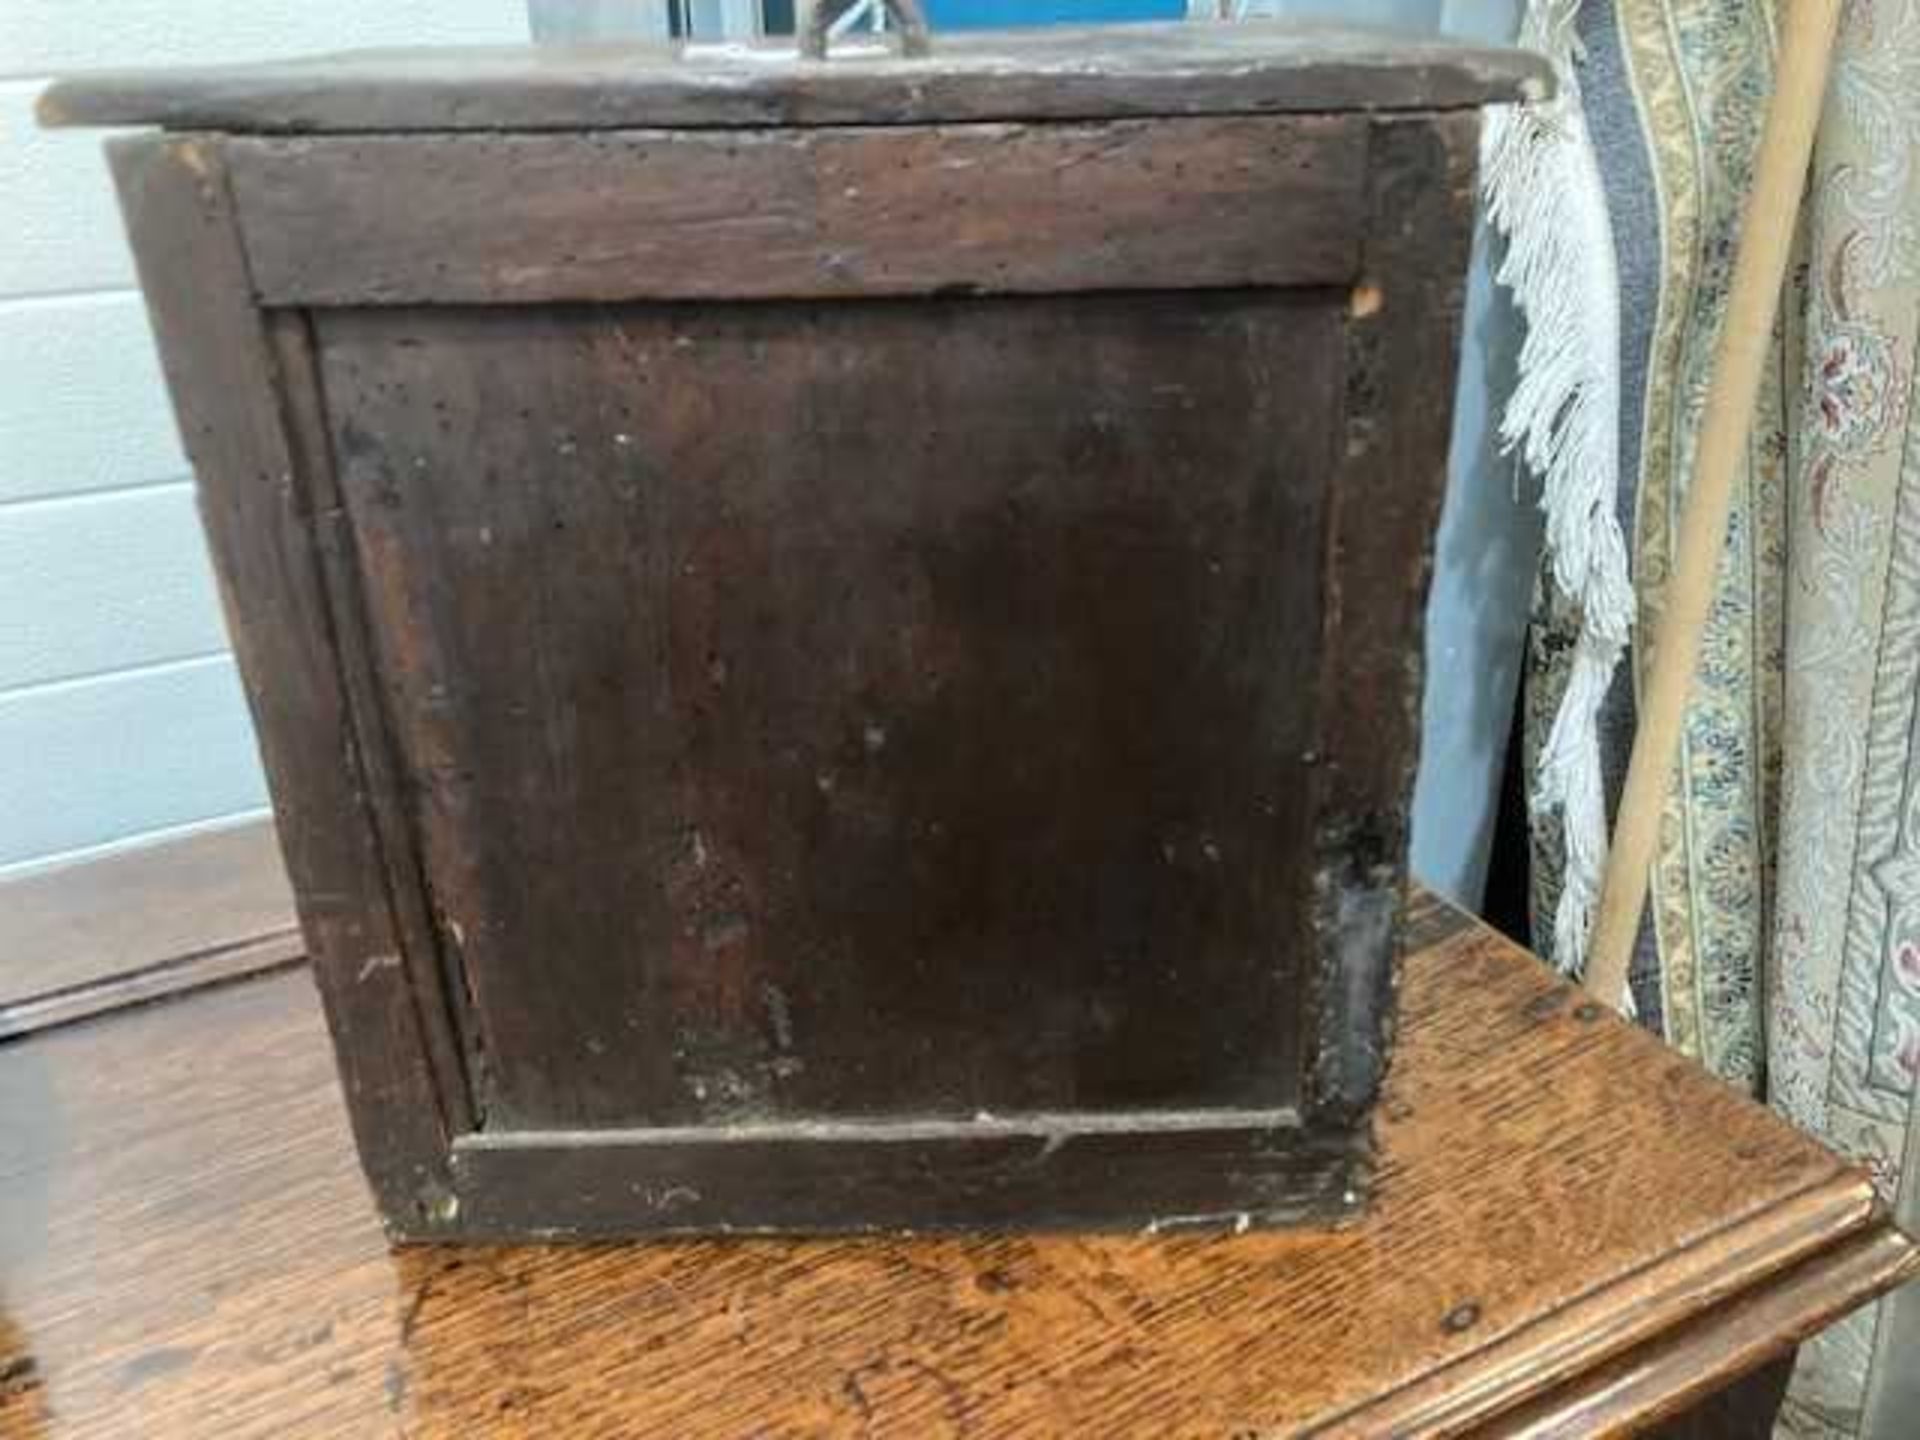 AN OAK SPICE CUPBOARD, LATE 17TH/EARLY 18TH CENTURY - Image 3 of 4